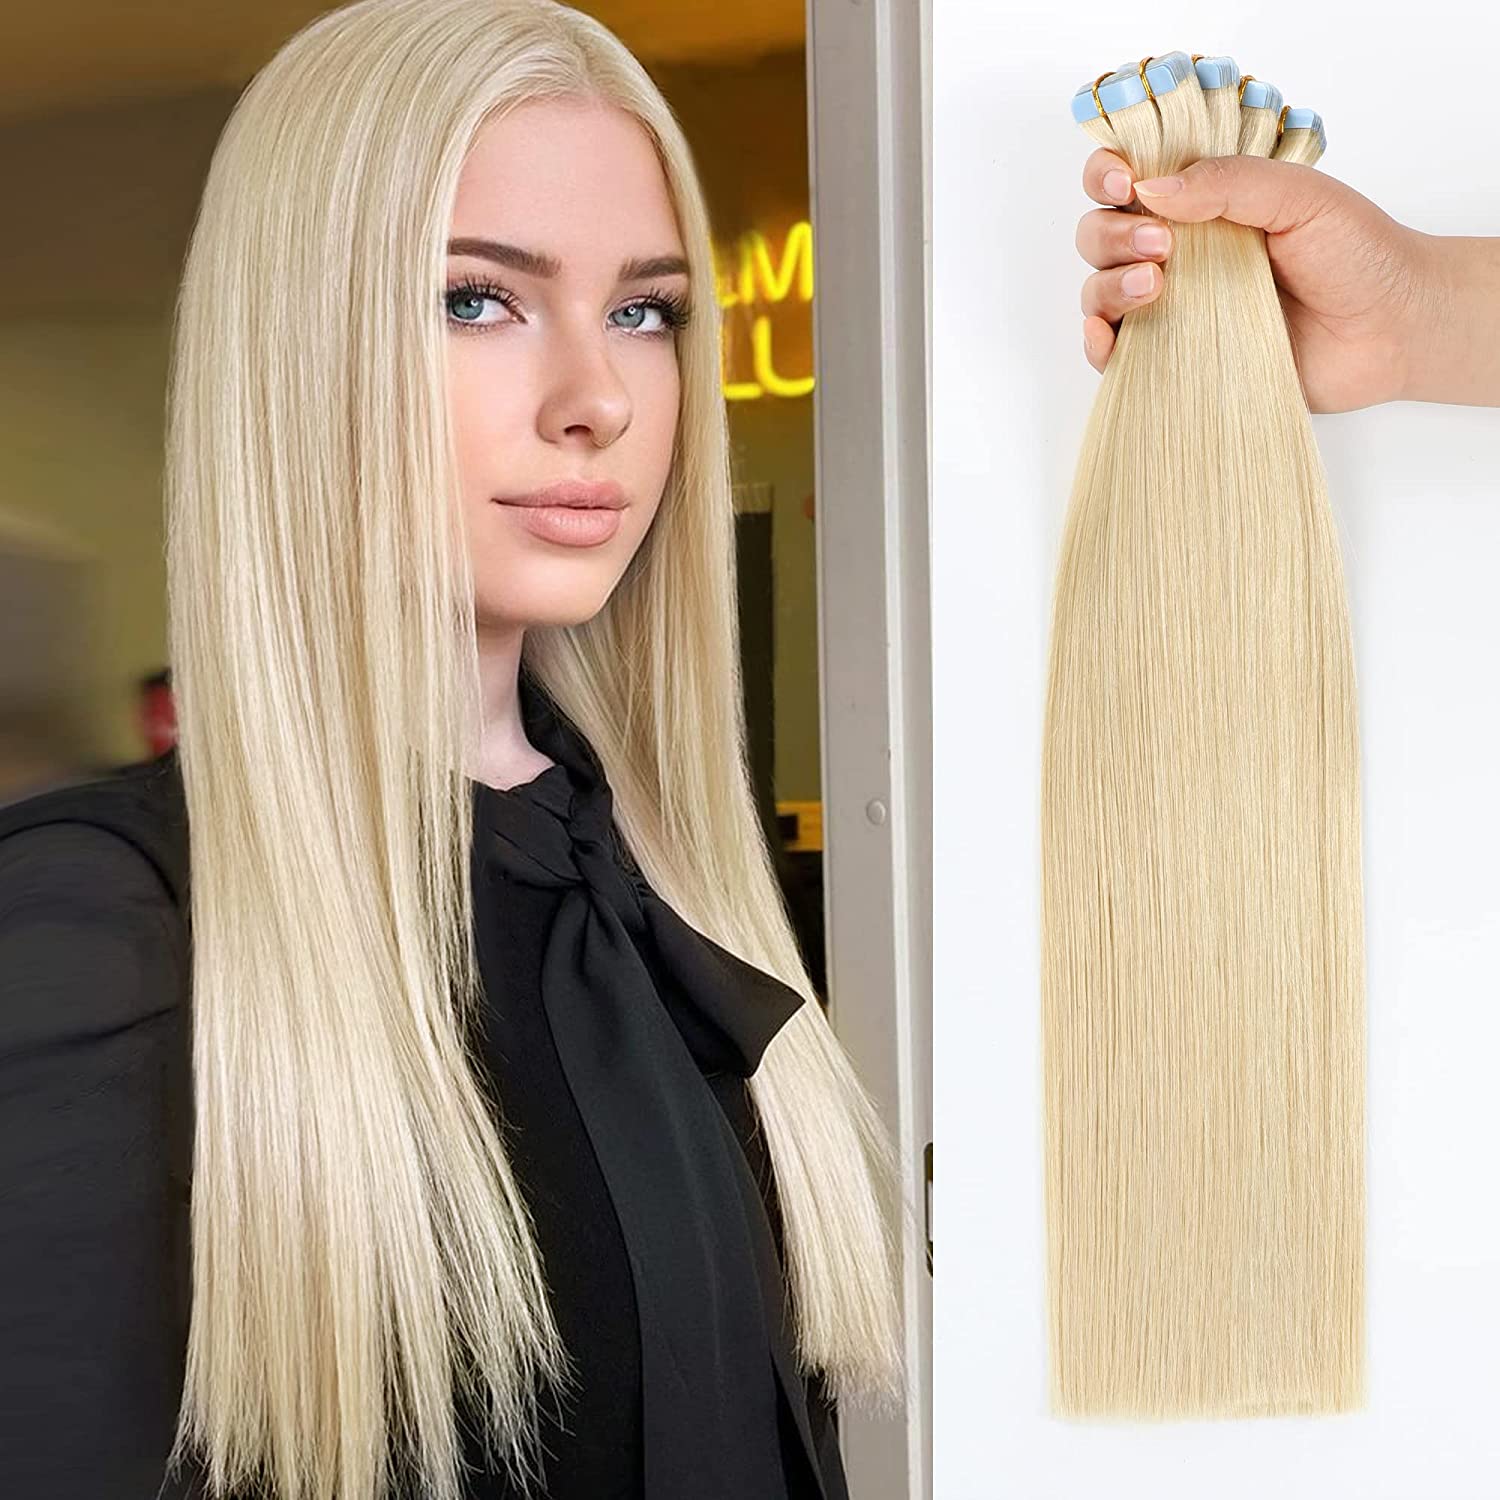 YILITE Hair Extensions Real Human Hair Bleach Blonde 100% Remy Human Hair 12 inch -24 inch 20pcs pack Straight Seamless Skin Weft Tape 